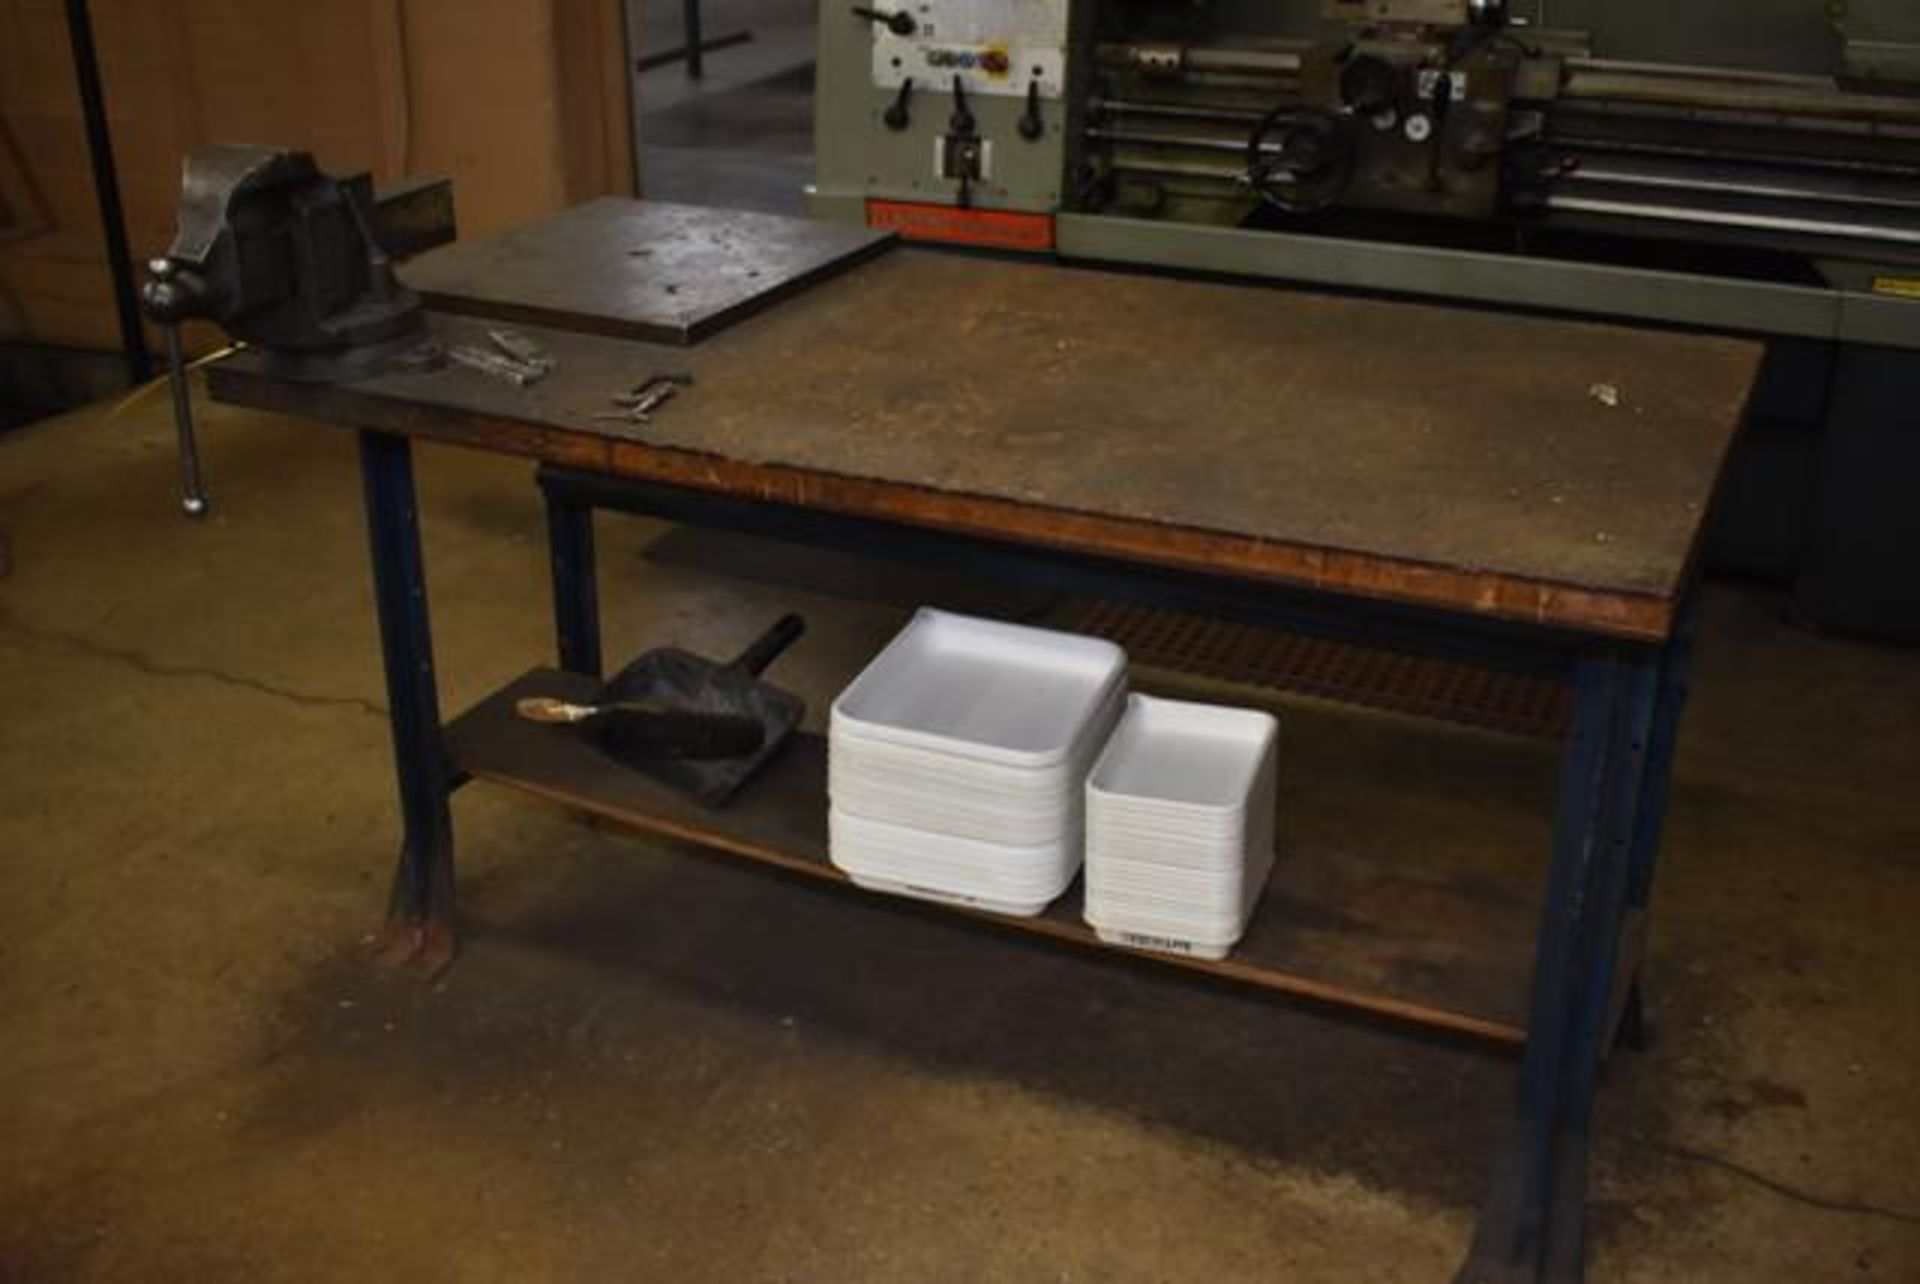 Work Table w/Vise, 60" x 30", Loading Fee: $50 - Image 2 of 2